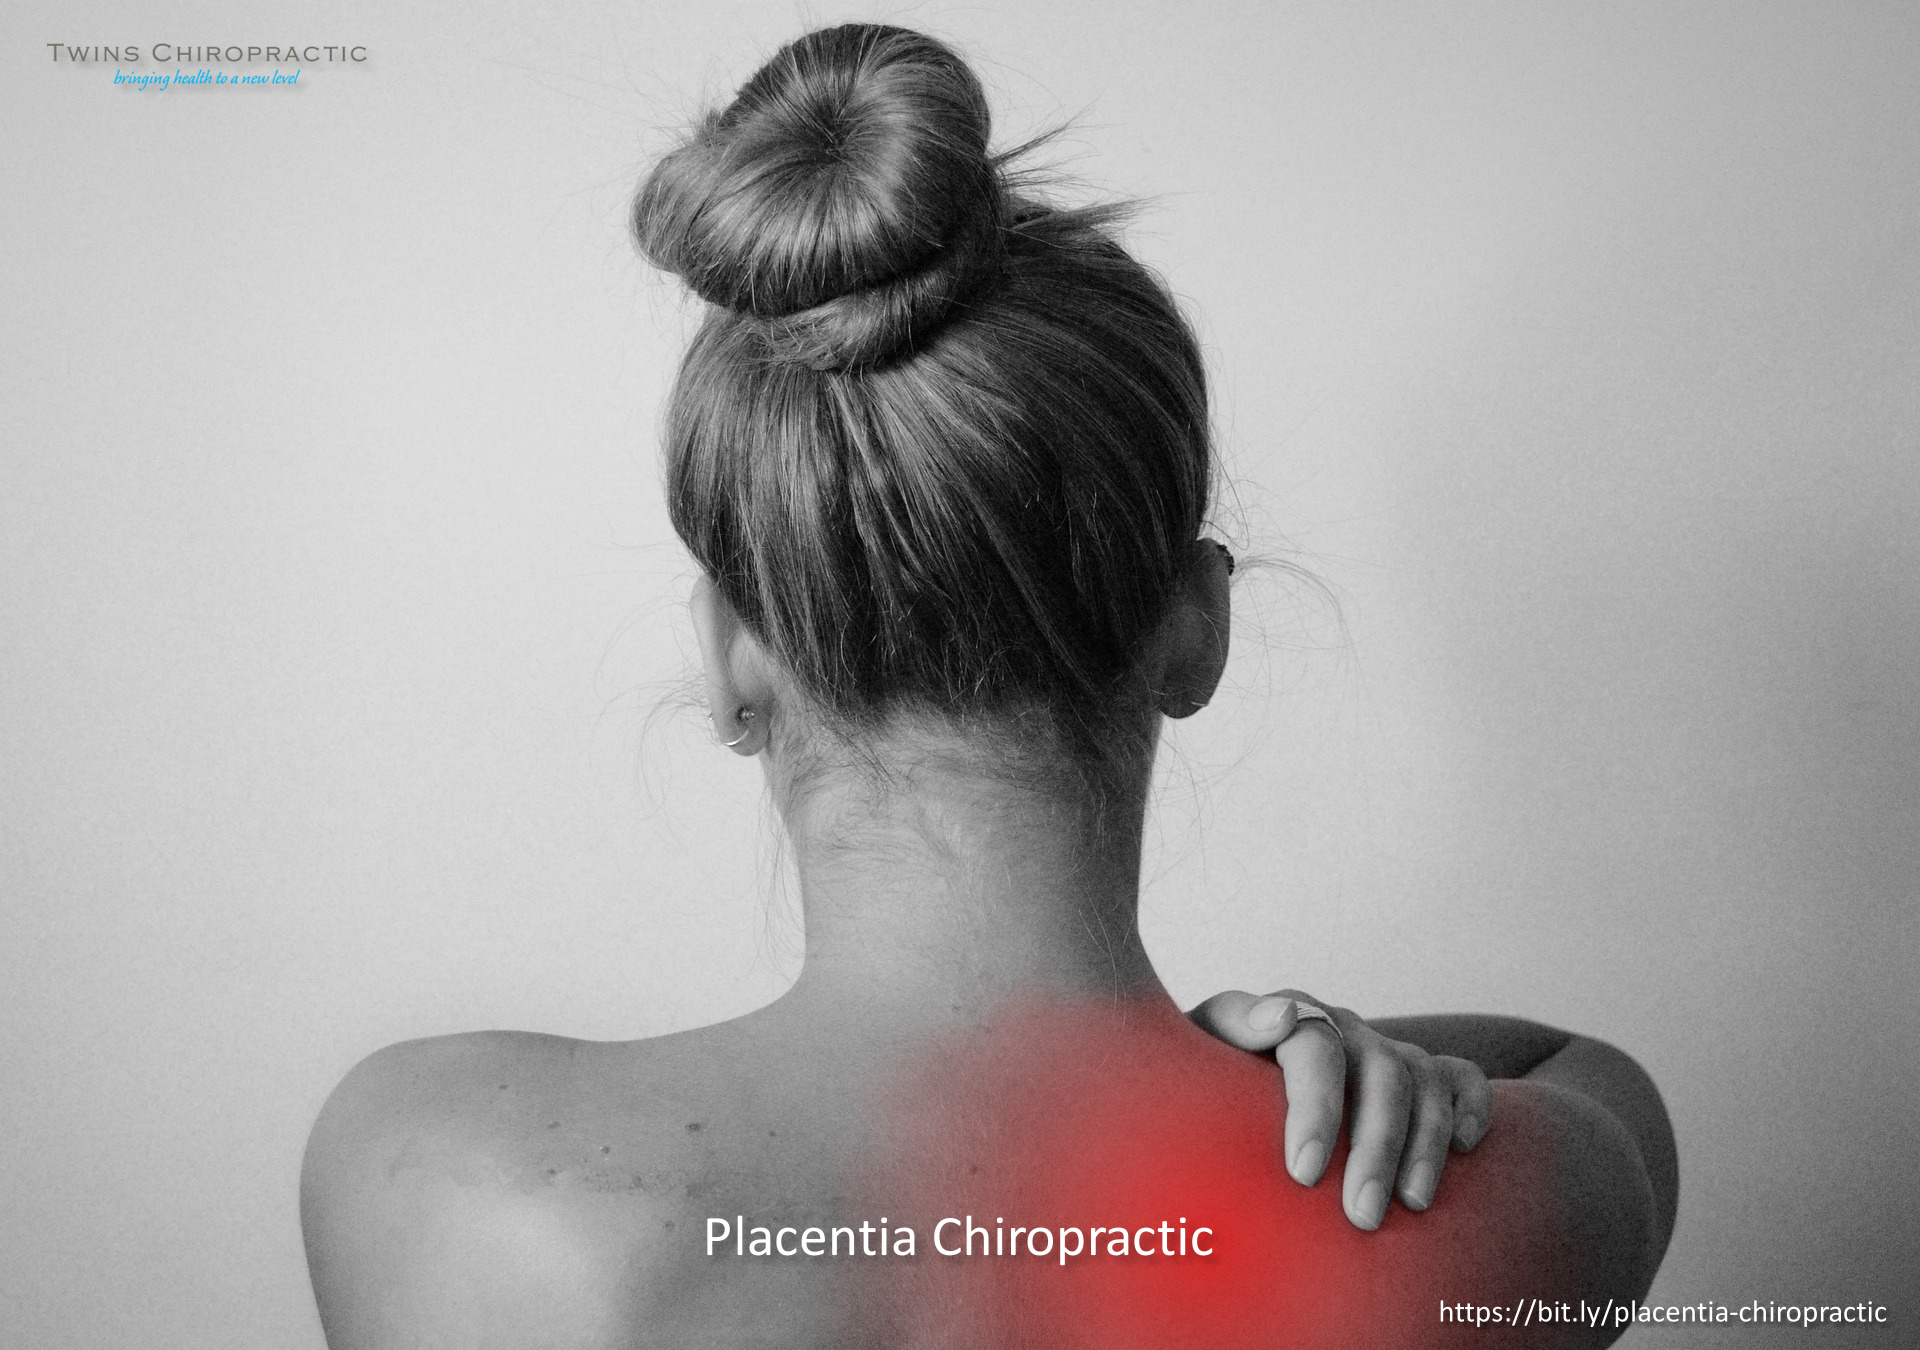 Twins Chiropractic (Placentia) (M4B) (GMB) - 1